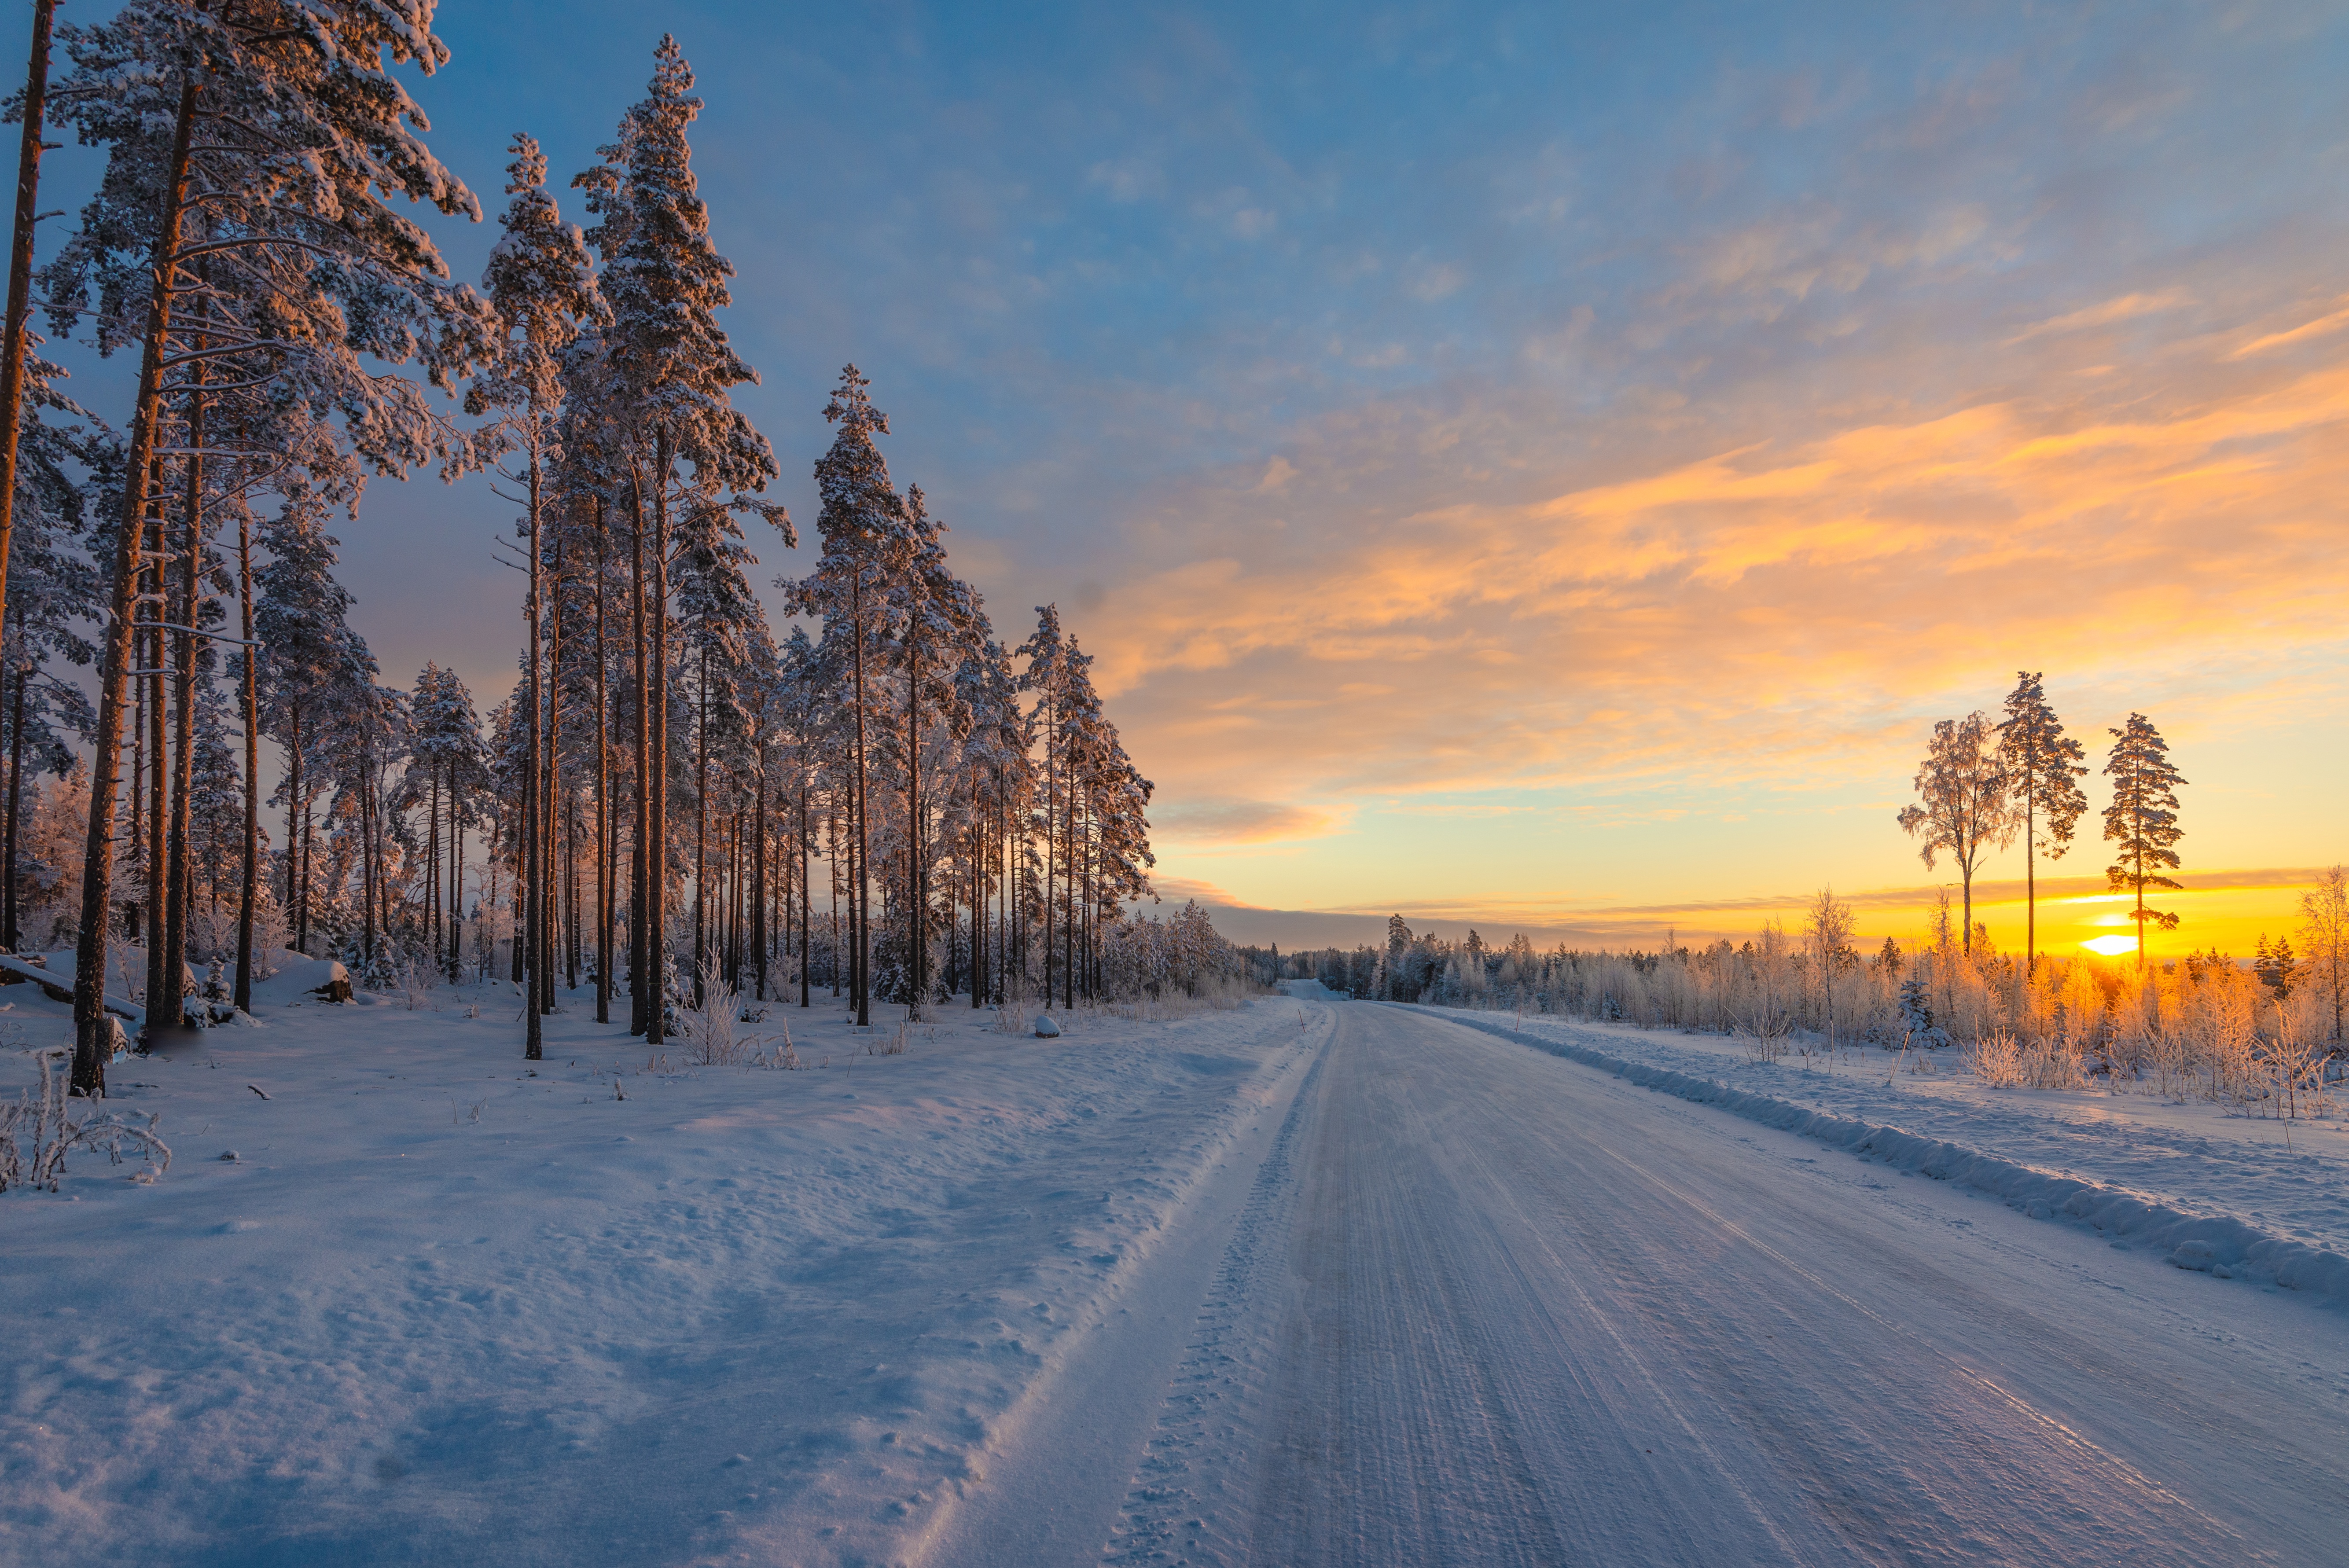 Finland Winter Snow Trees Sunset Road Sky Clouds Pine Trees Nature Landscape 5337x3563